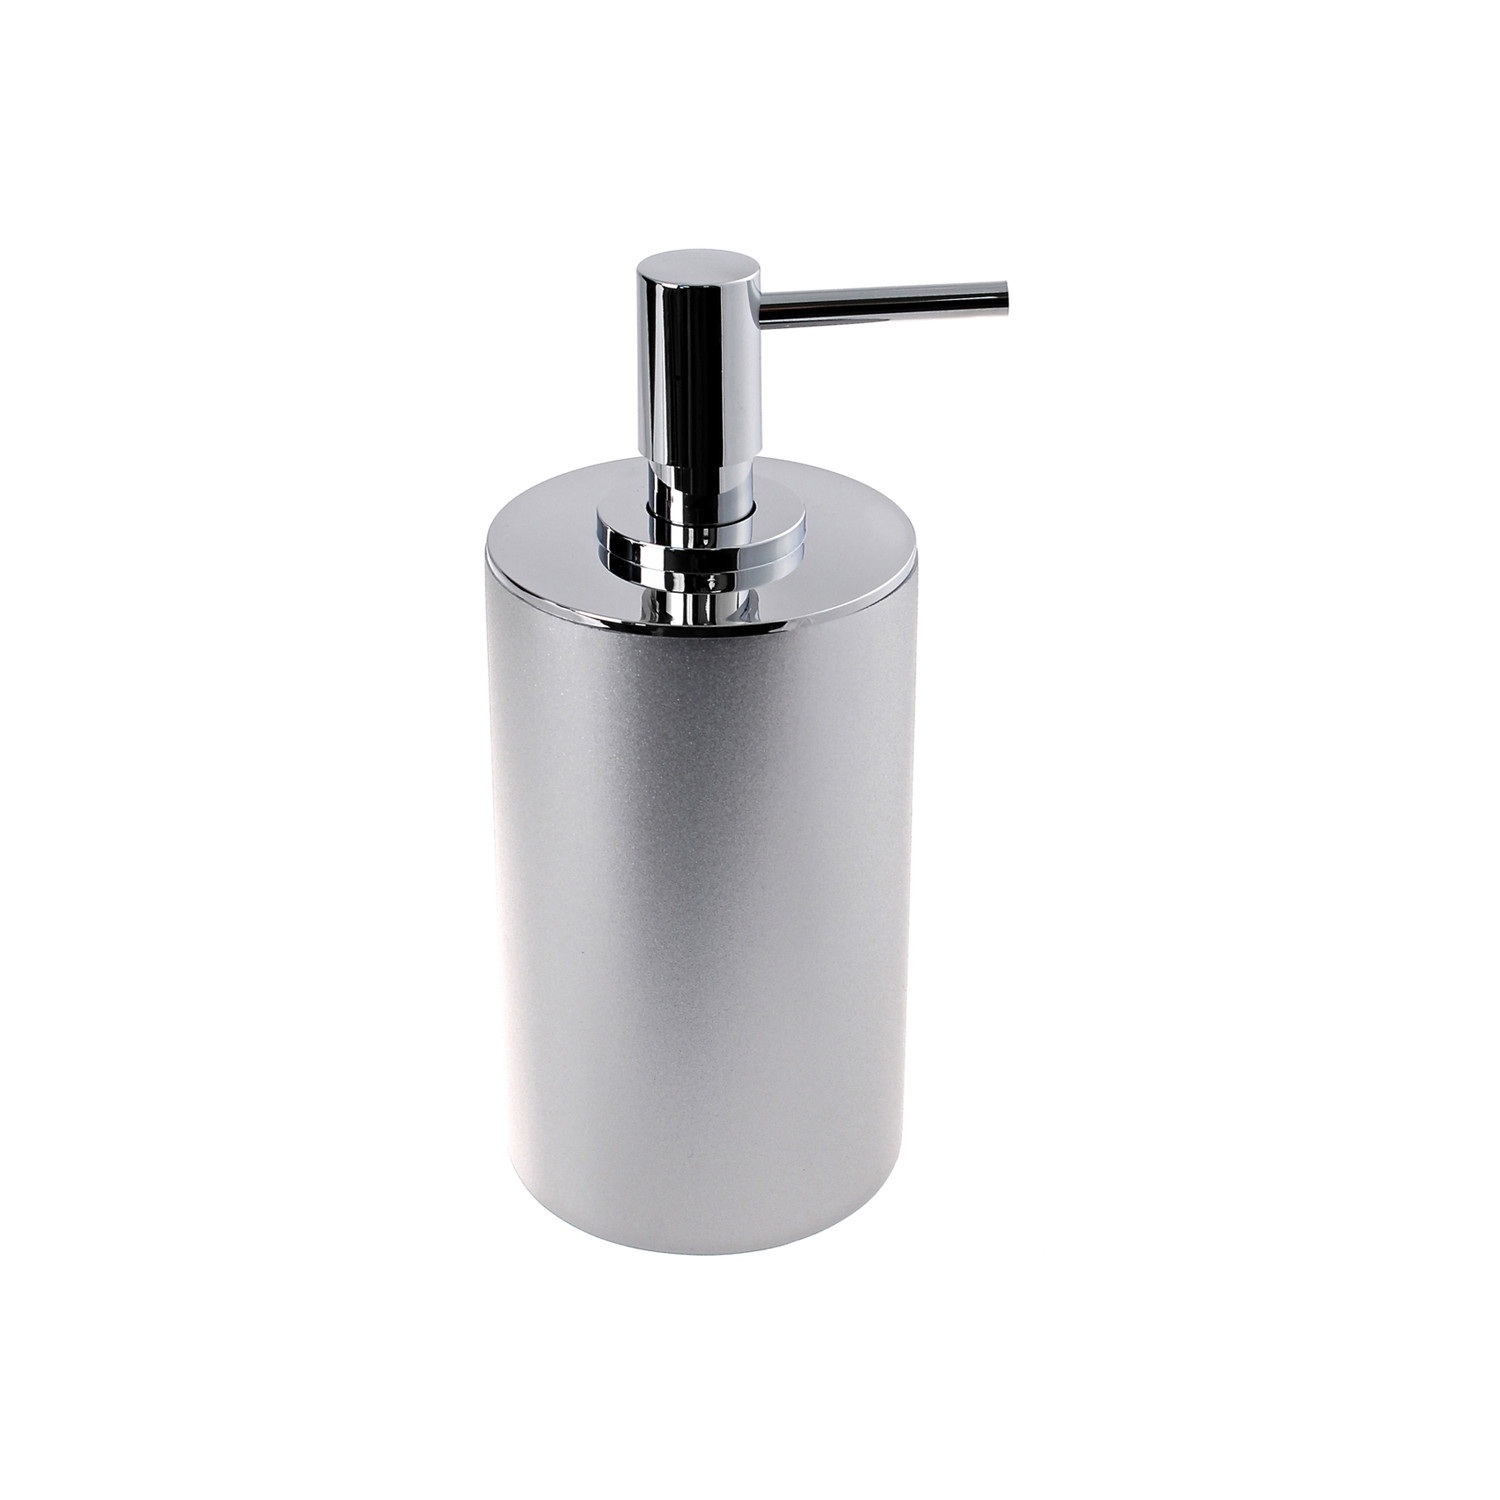 Tall Soap Dispenser Gedy (Silver) - Nameek's Bath Accessories - Touch ...